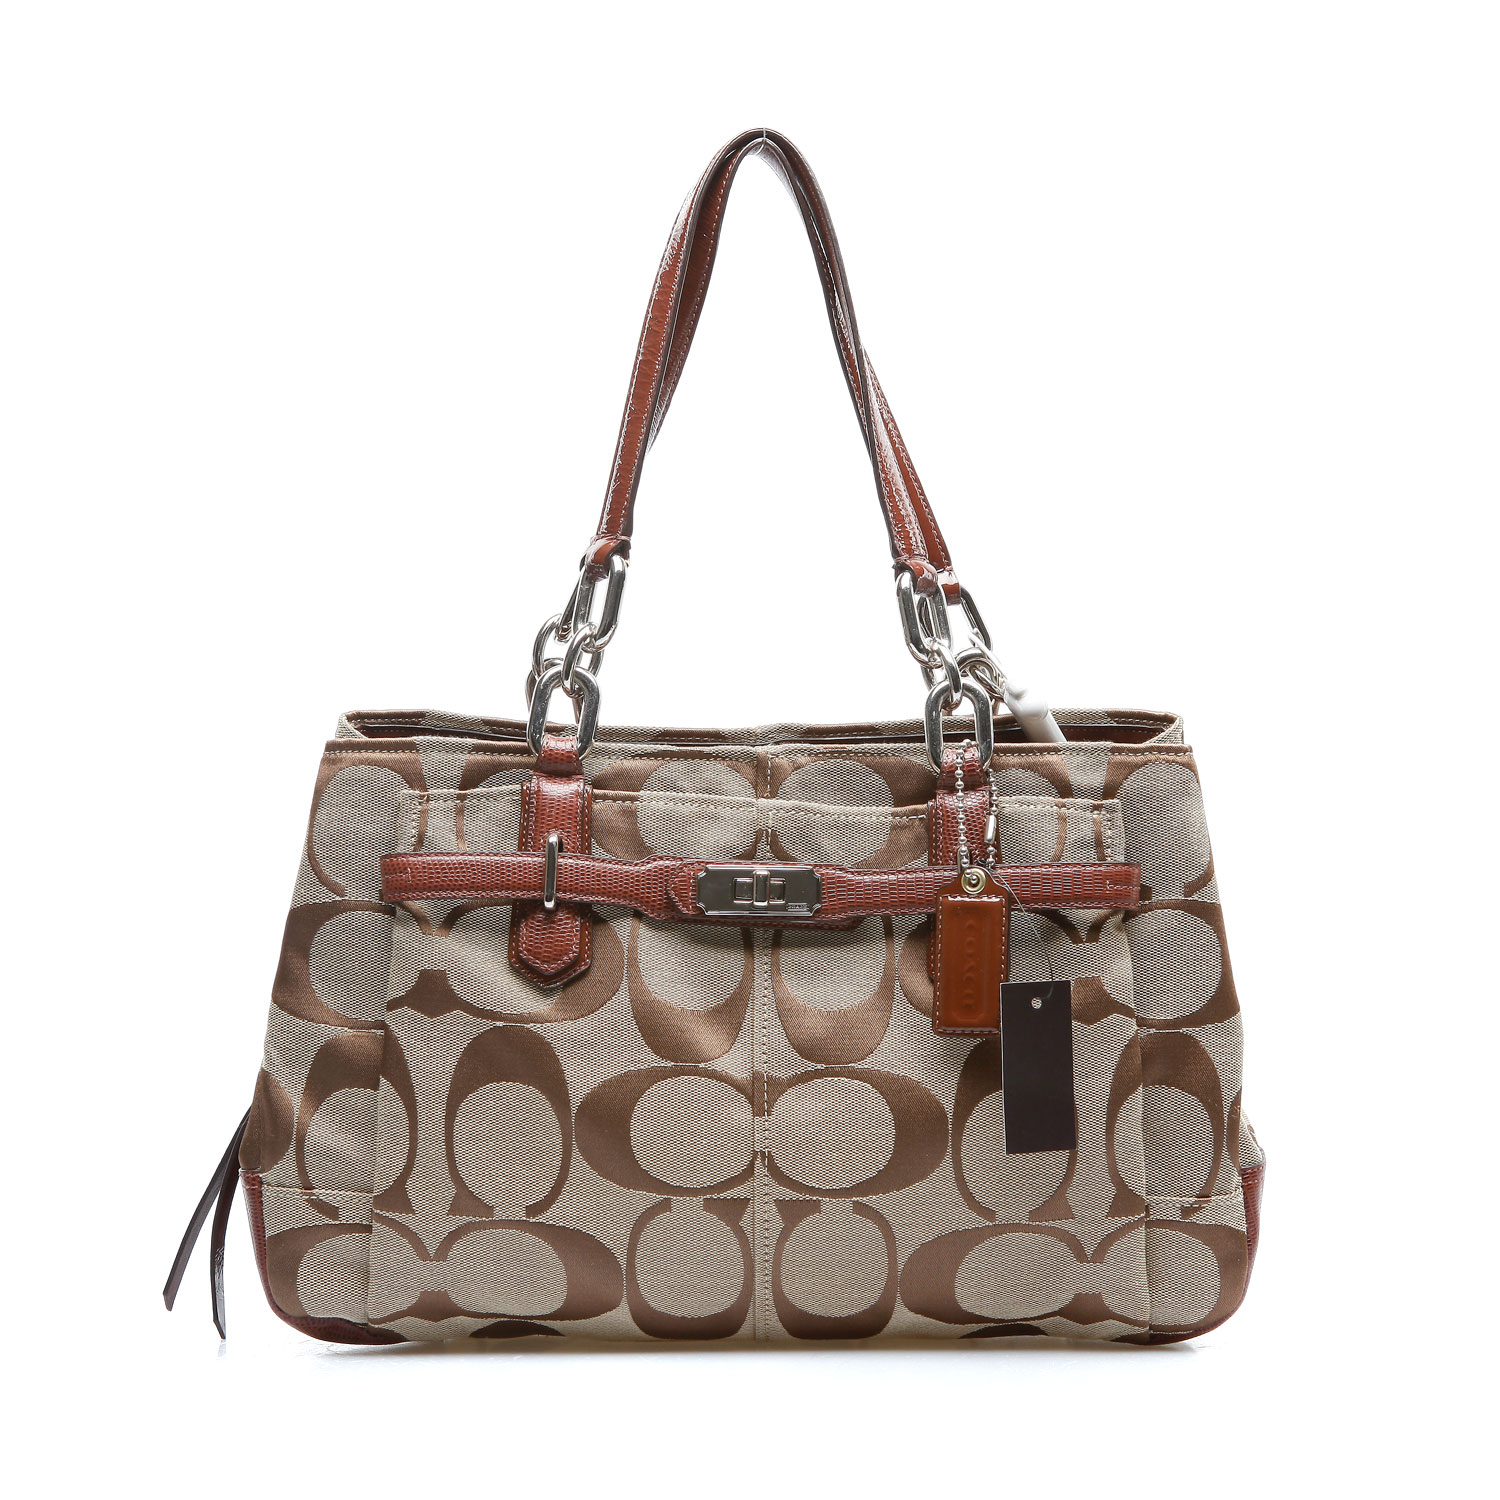 Small Handbags: Coach Outlet Online